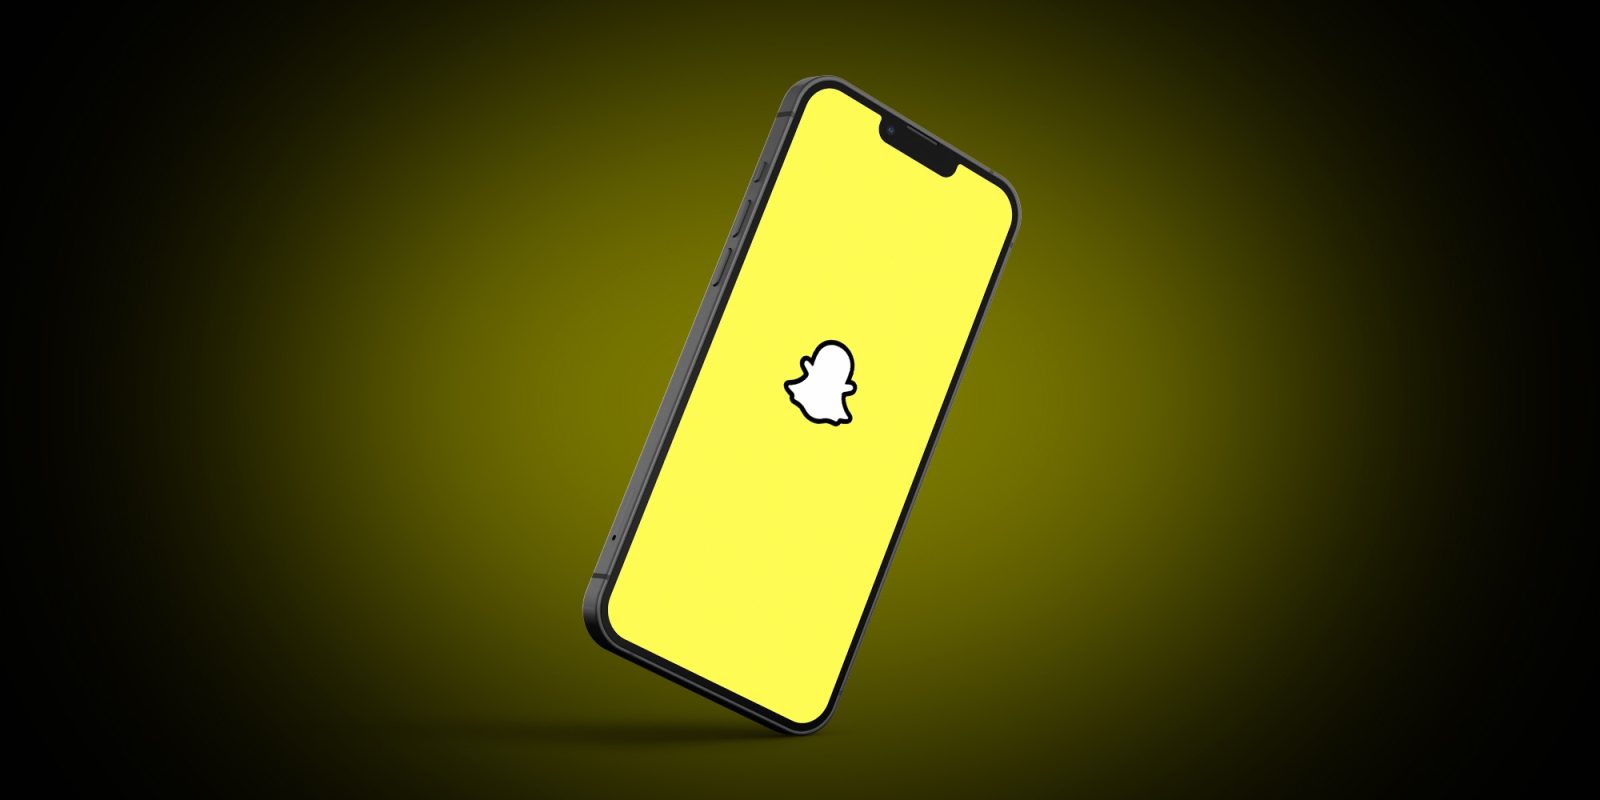 Snapchat introduces new ‘Shared Stories’ so users can create collaborative memories